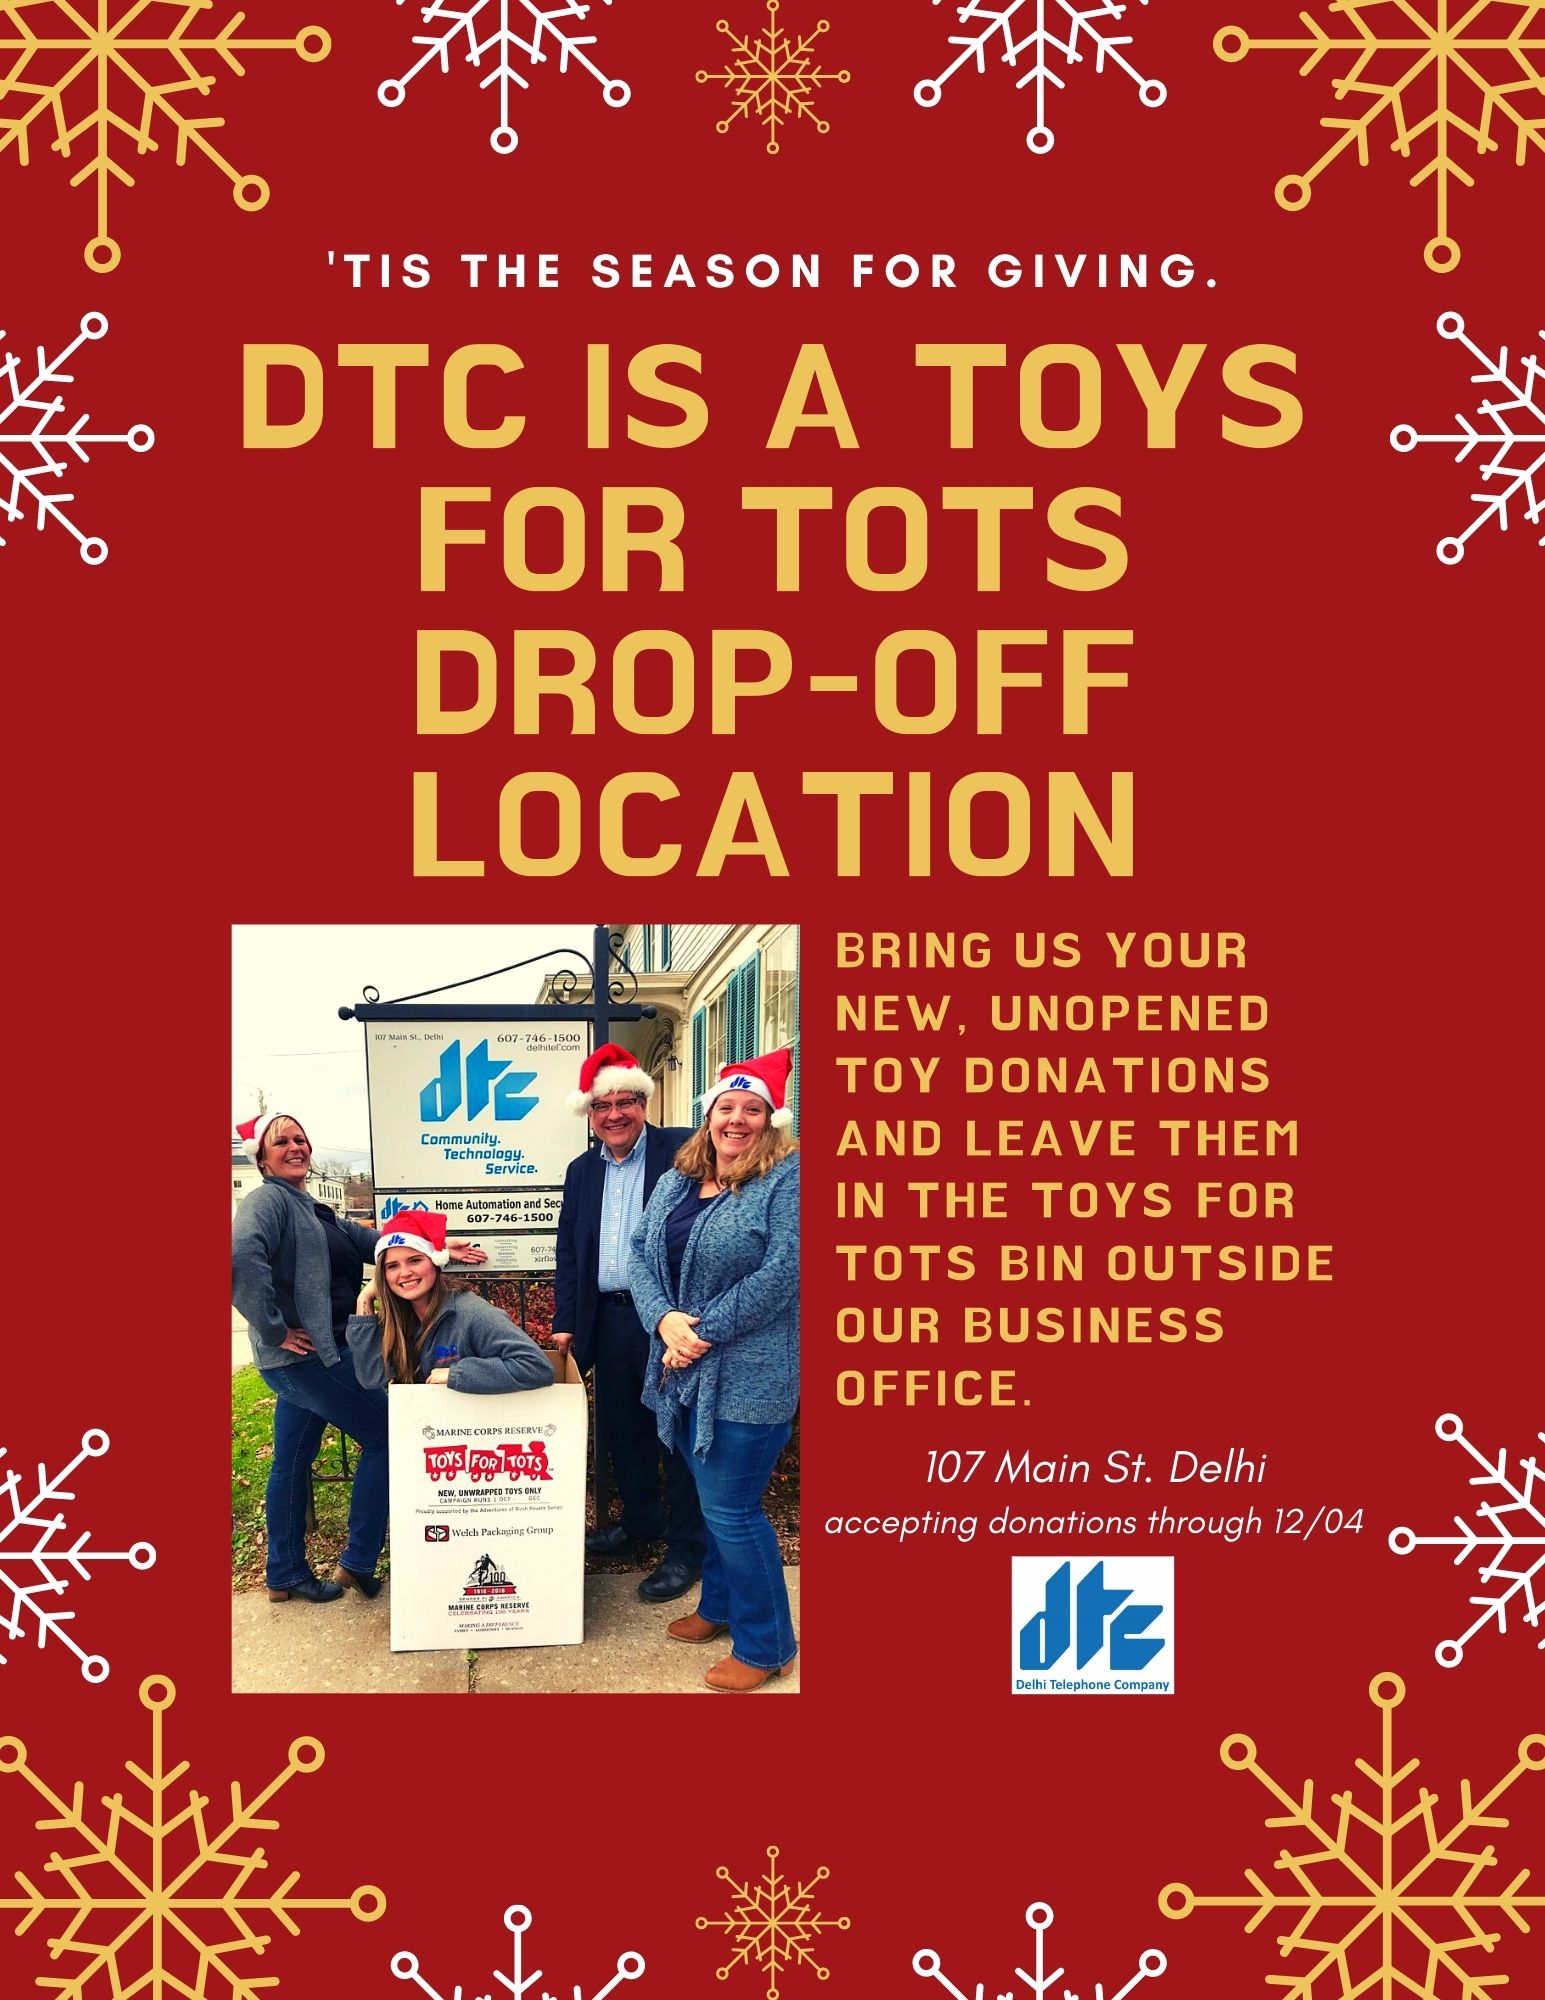 DTC Toys for Tots Drop Off Location